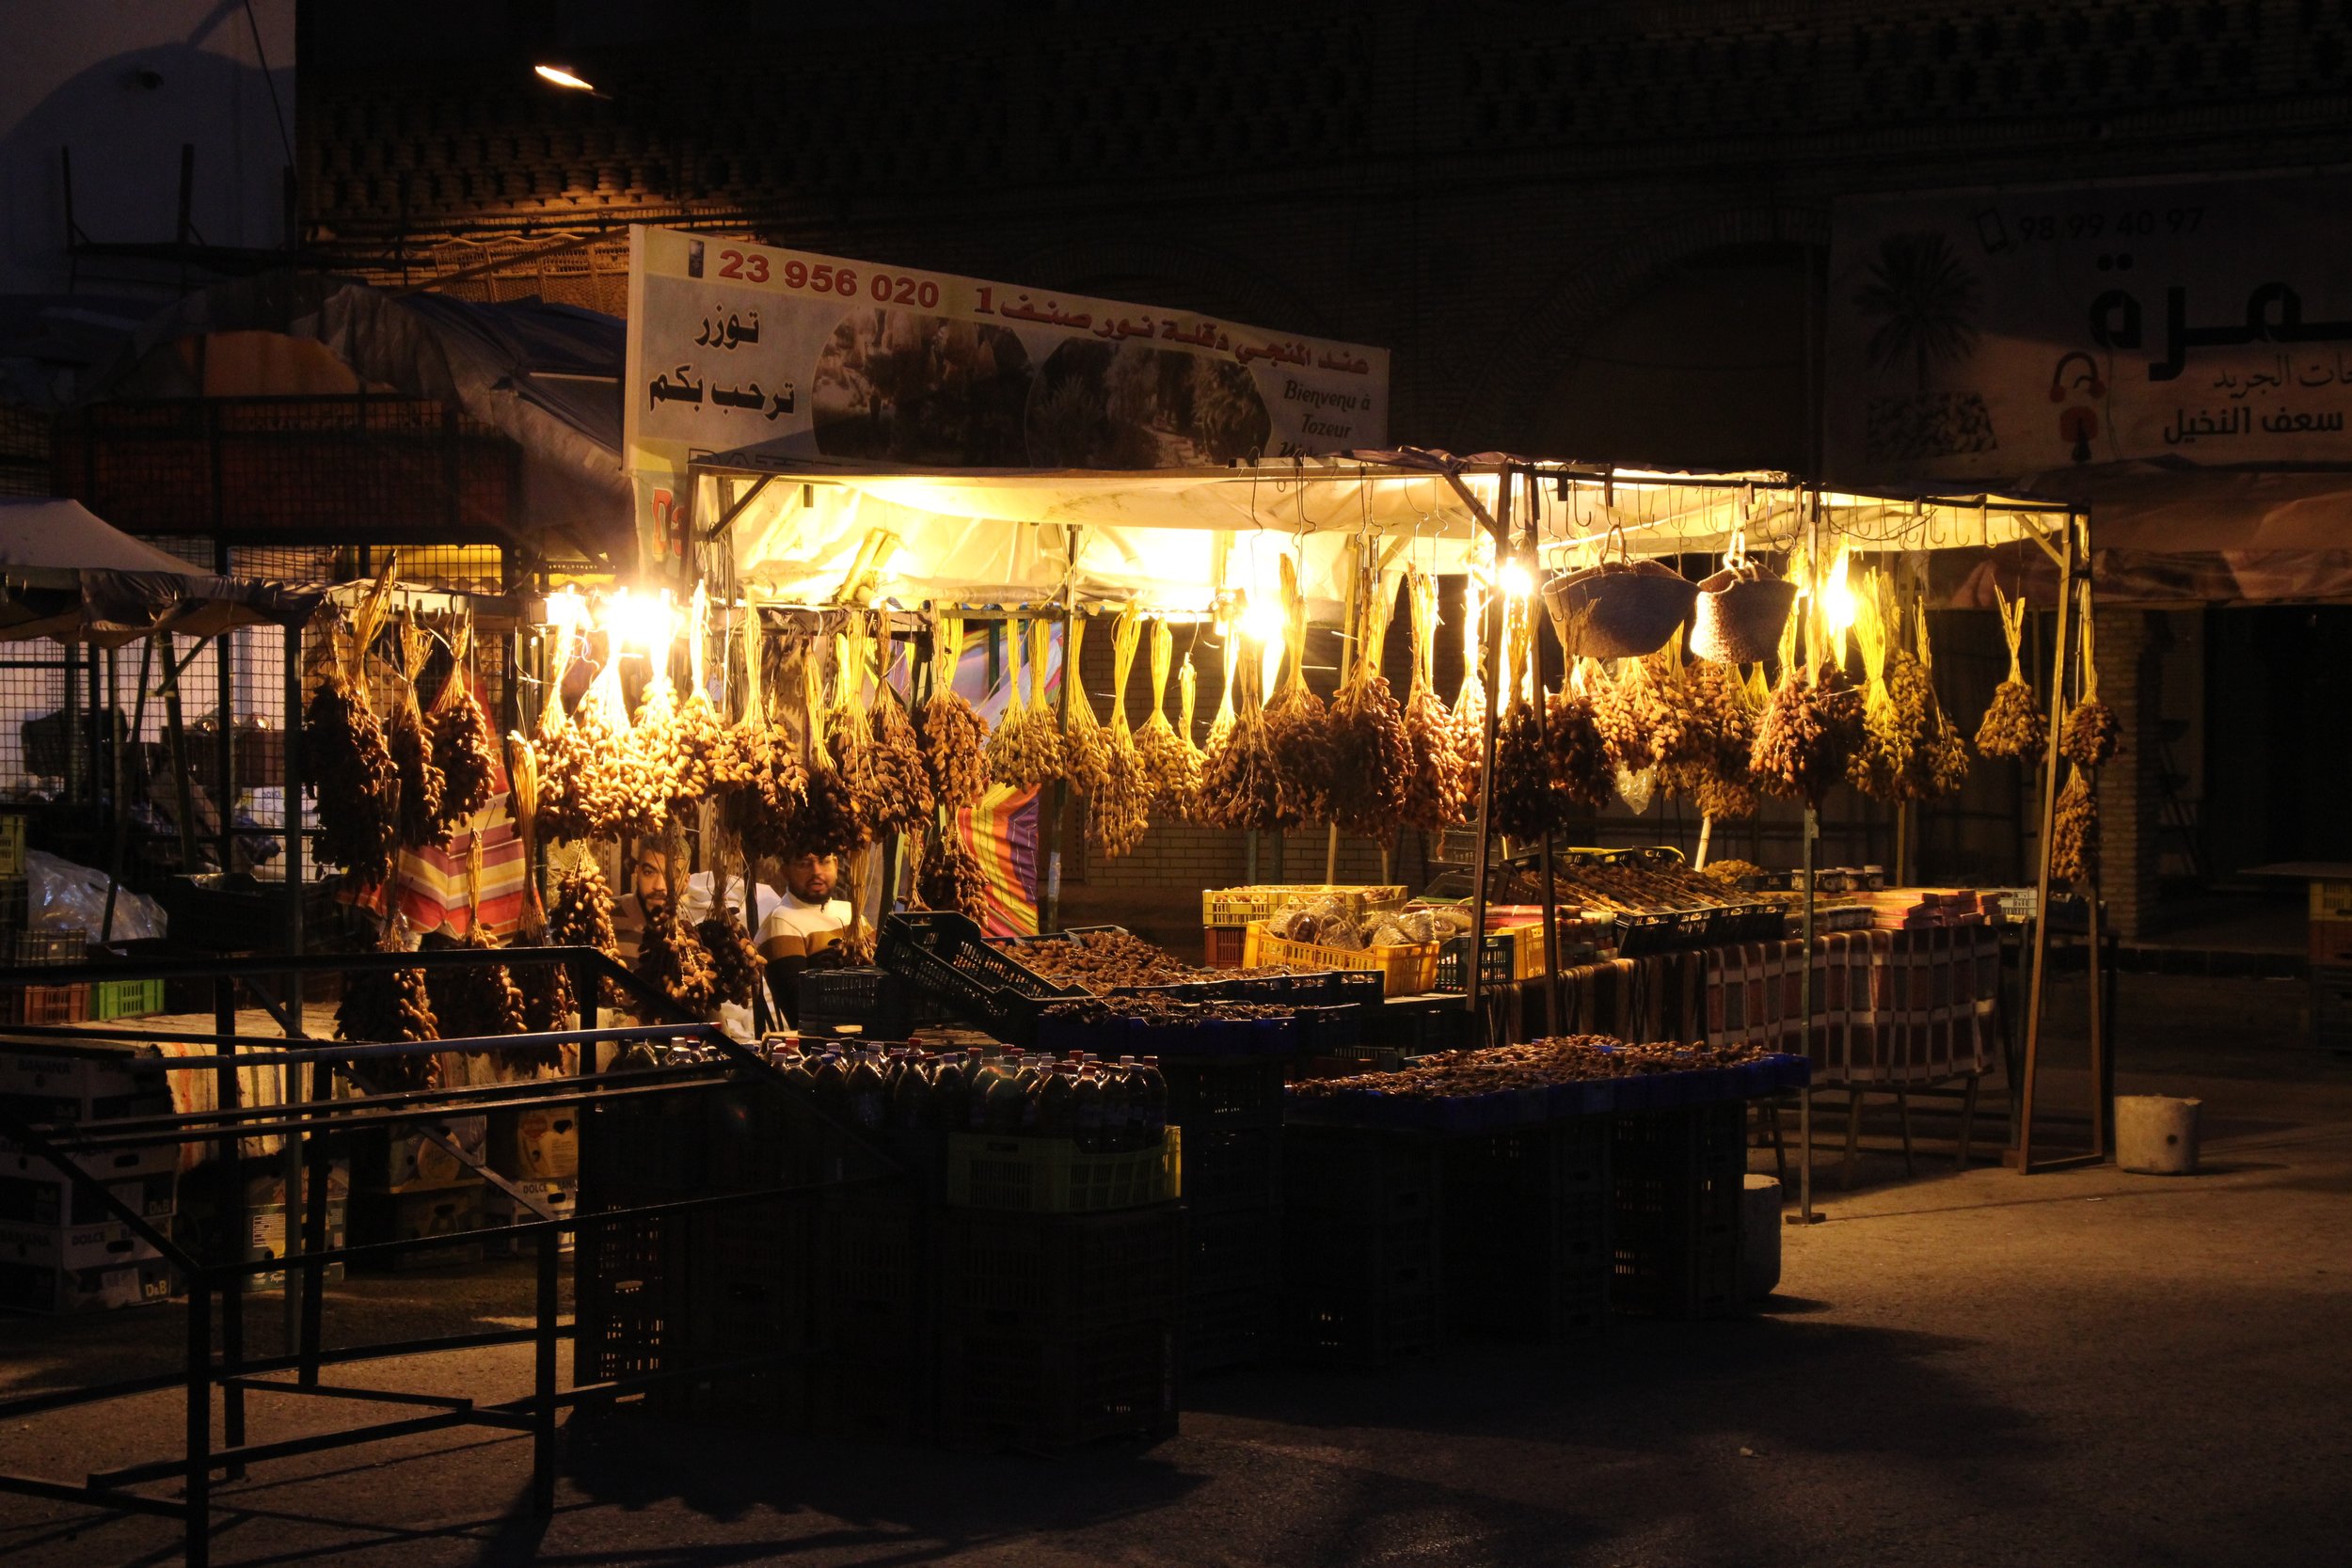  PICTURED: The date market of Tozeur at night PC: Andrew Corbley © 